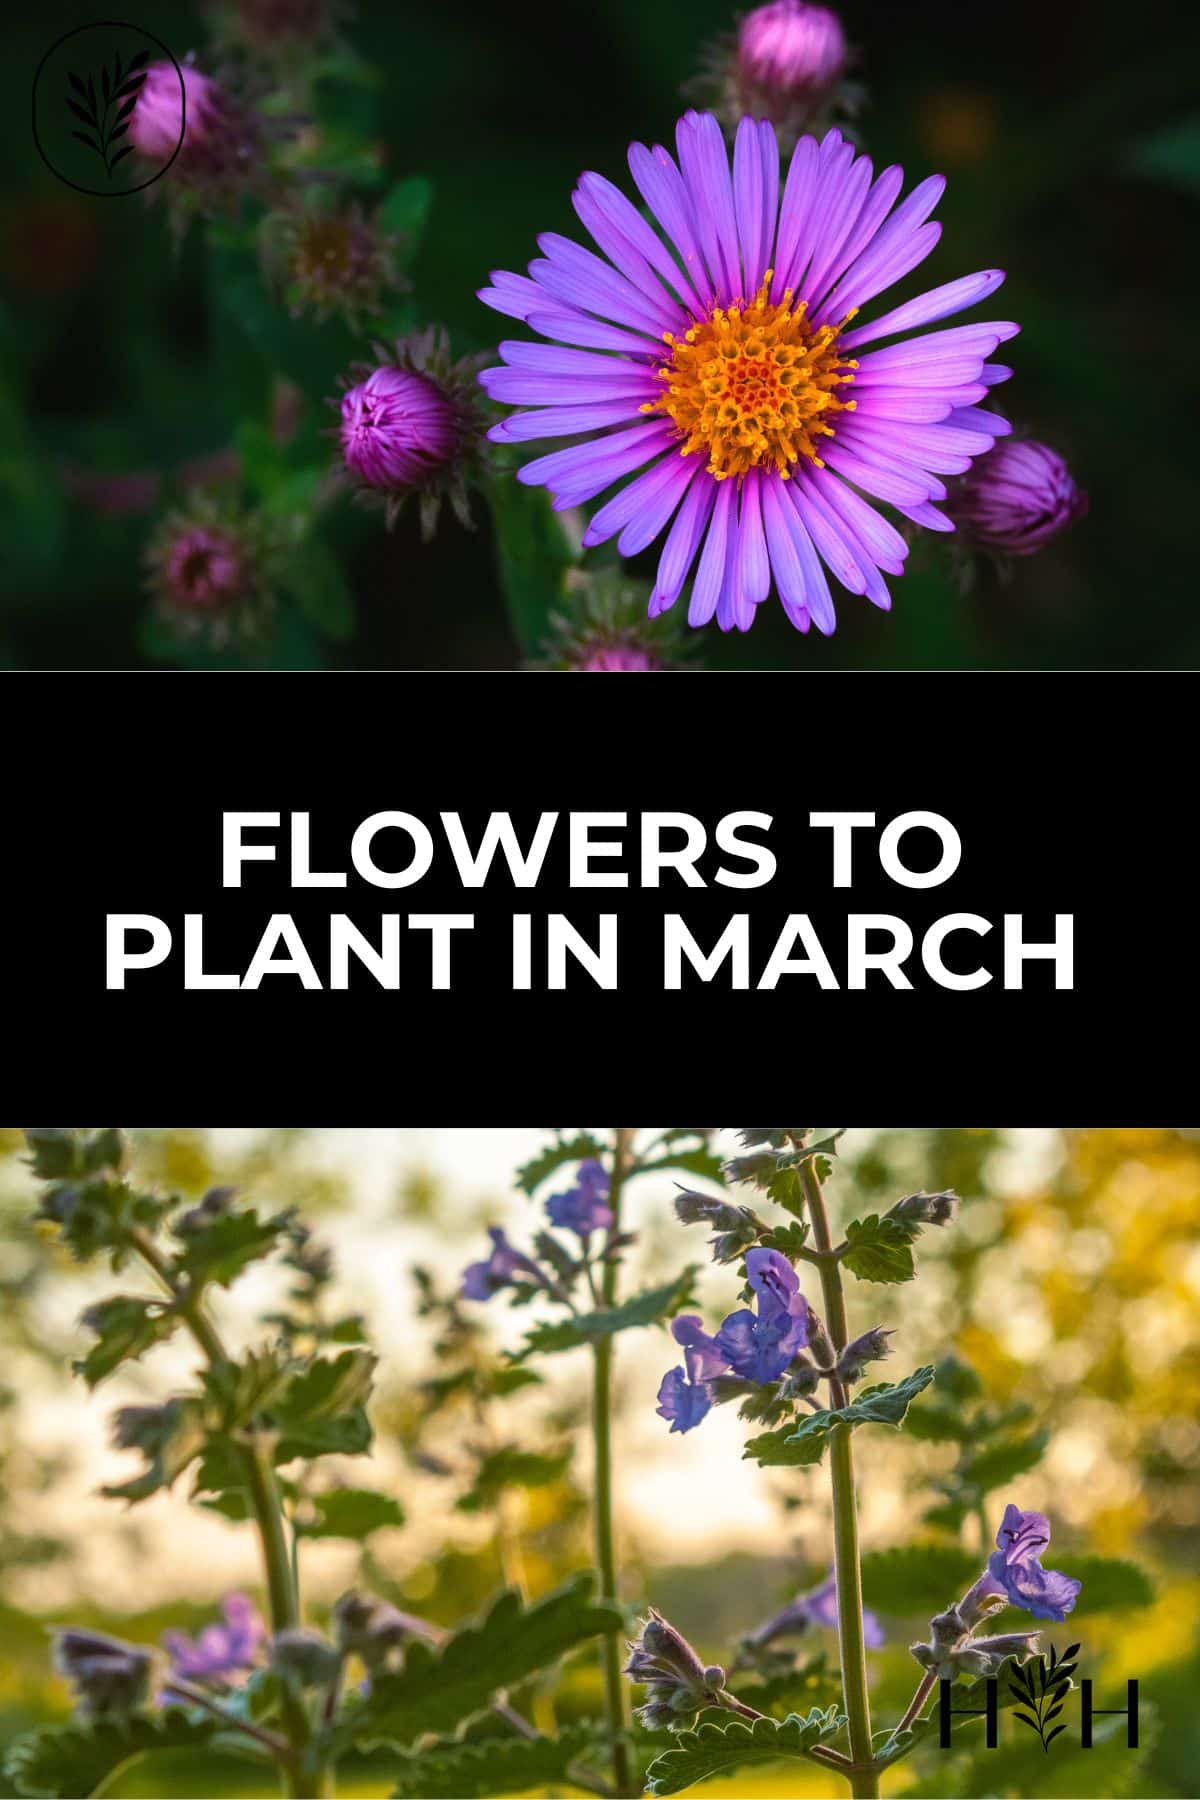 Flowers to plant in march via @home4theharvest